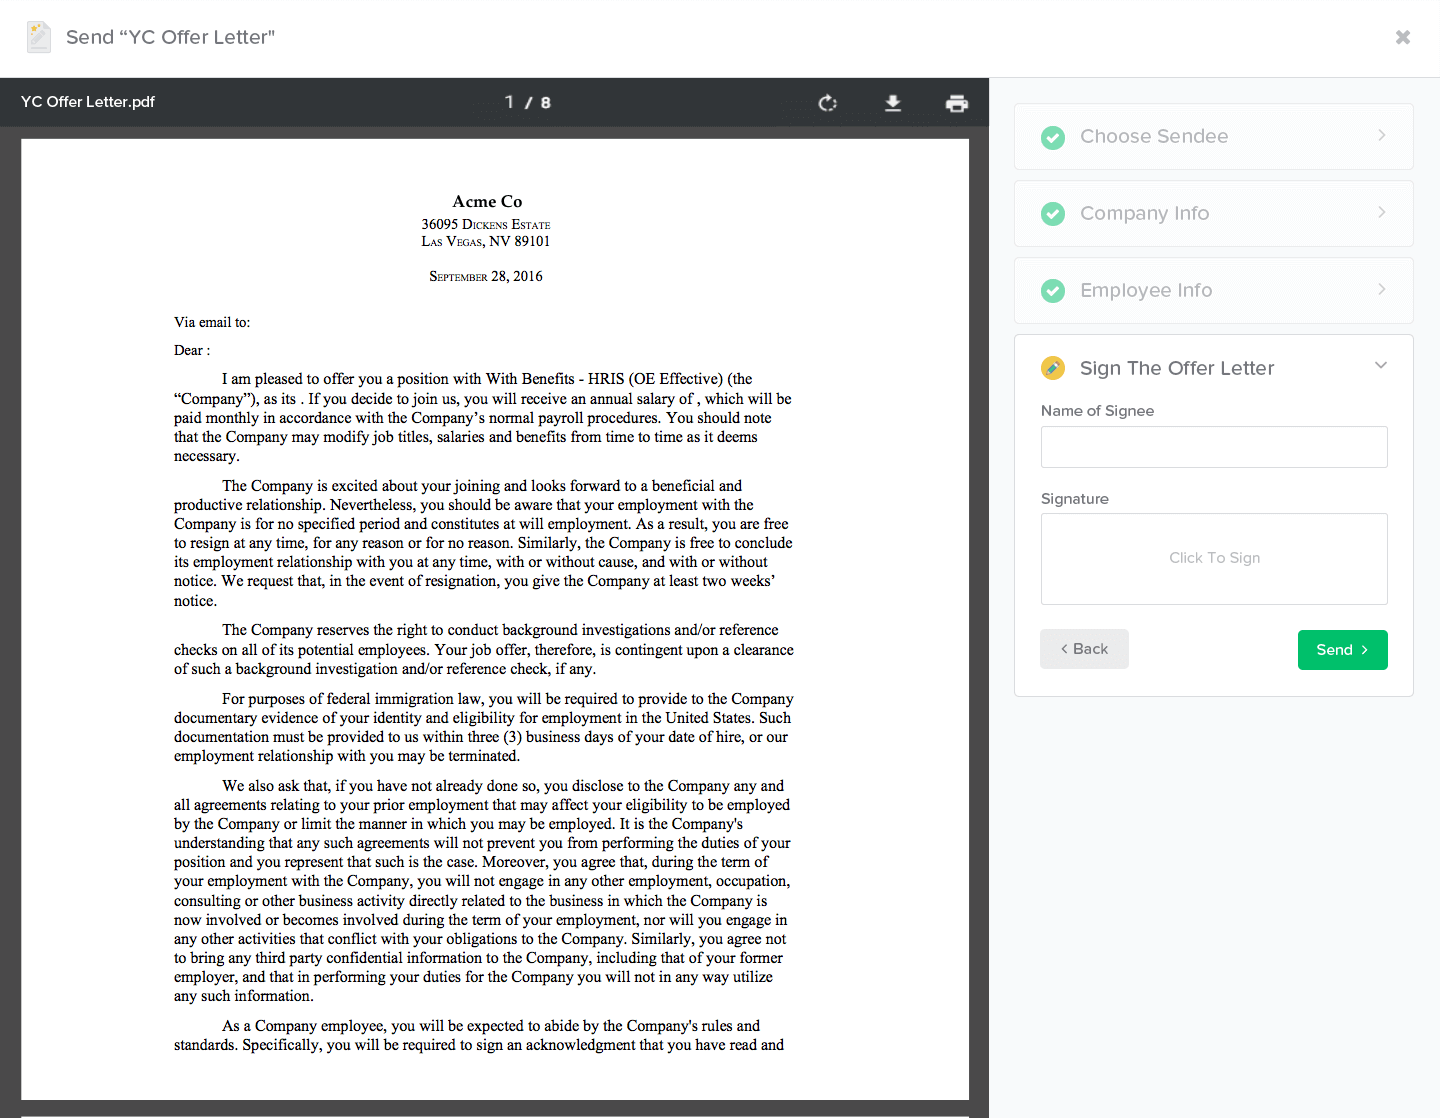 Sending a magic offer letter template with fields filled in.